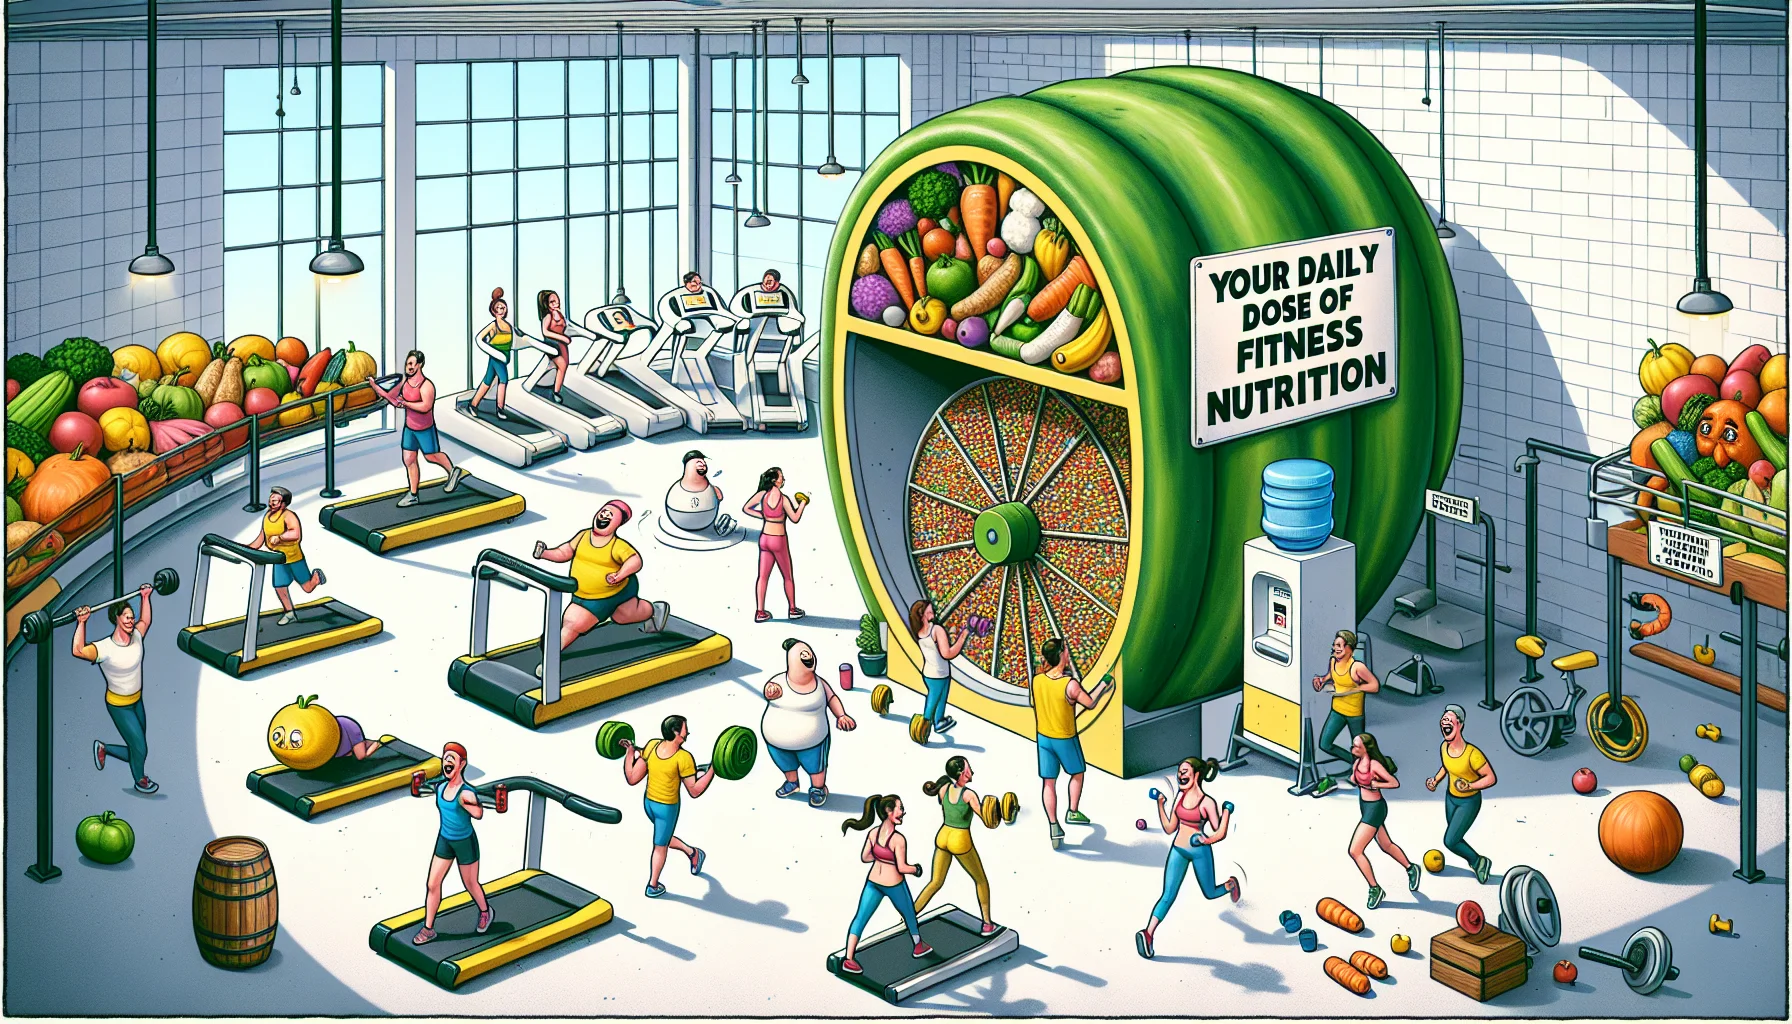 Create an image depicting a humorous fitness scenario. Imagine a room filled with quirky gym equipment, like dumbbells shaped like vegetables and a treadmill that looks like a giant hamster wheel. In the center of the room, instead of a water cooler, there's a giant dispenser labeled 'Your Daily Dose of Fitness Nutrition'. People of different genders, ages, and descents are laughing while participating in eccentric exercises, such as weightlifting with the veggie dumbbells and running on the hamster-wheel treadmill, all hinting towards the fun side of fitness.